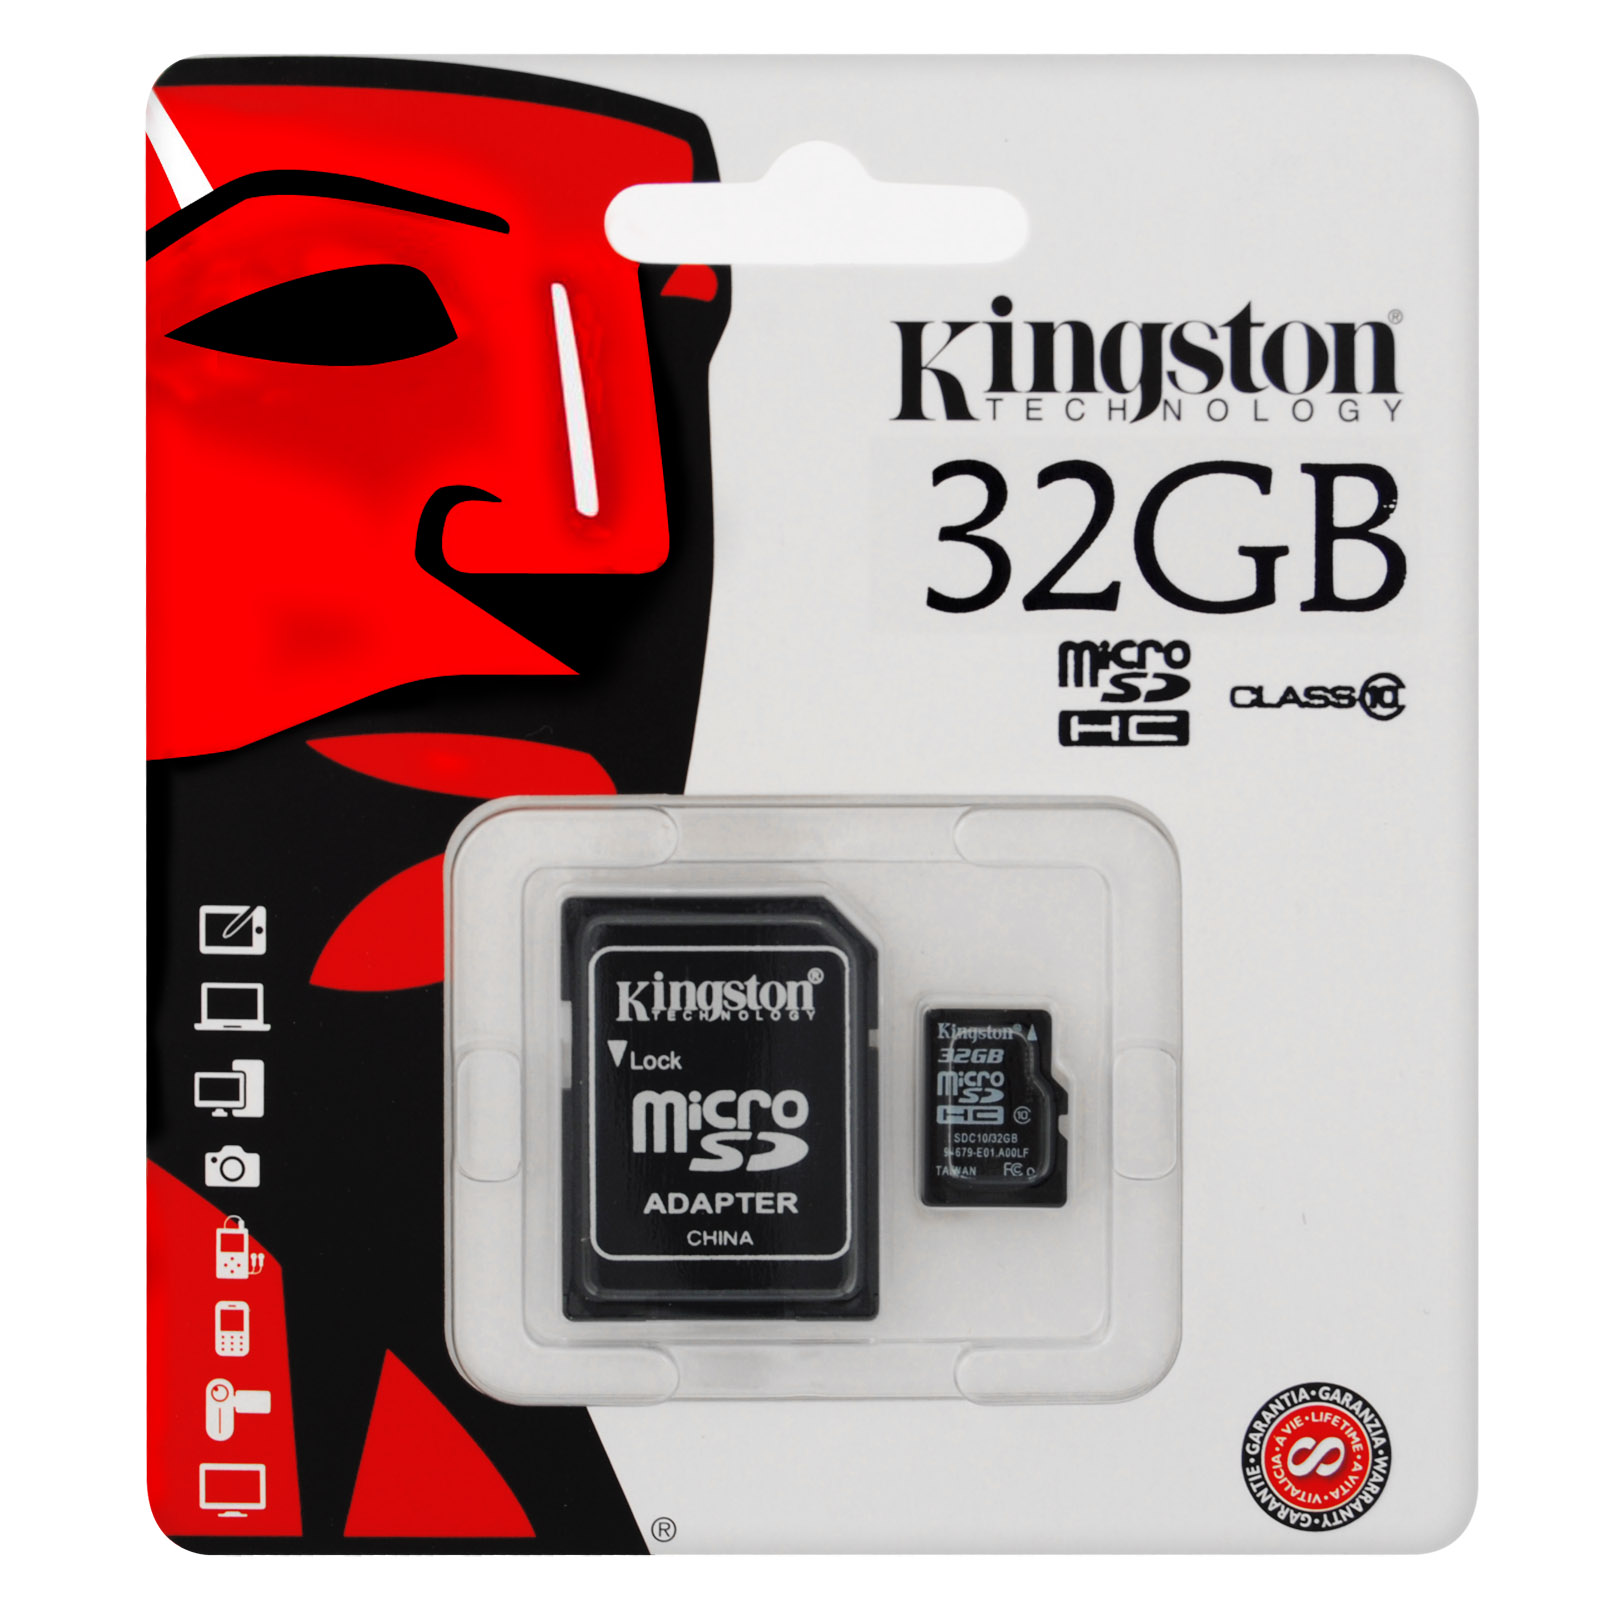 Kingston microSDHC 32 GB (Class 10) with SD Adapter SDC10/32GB